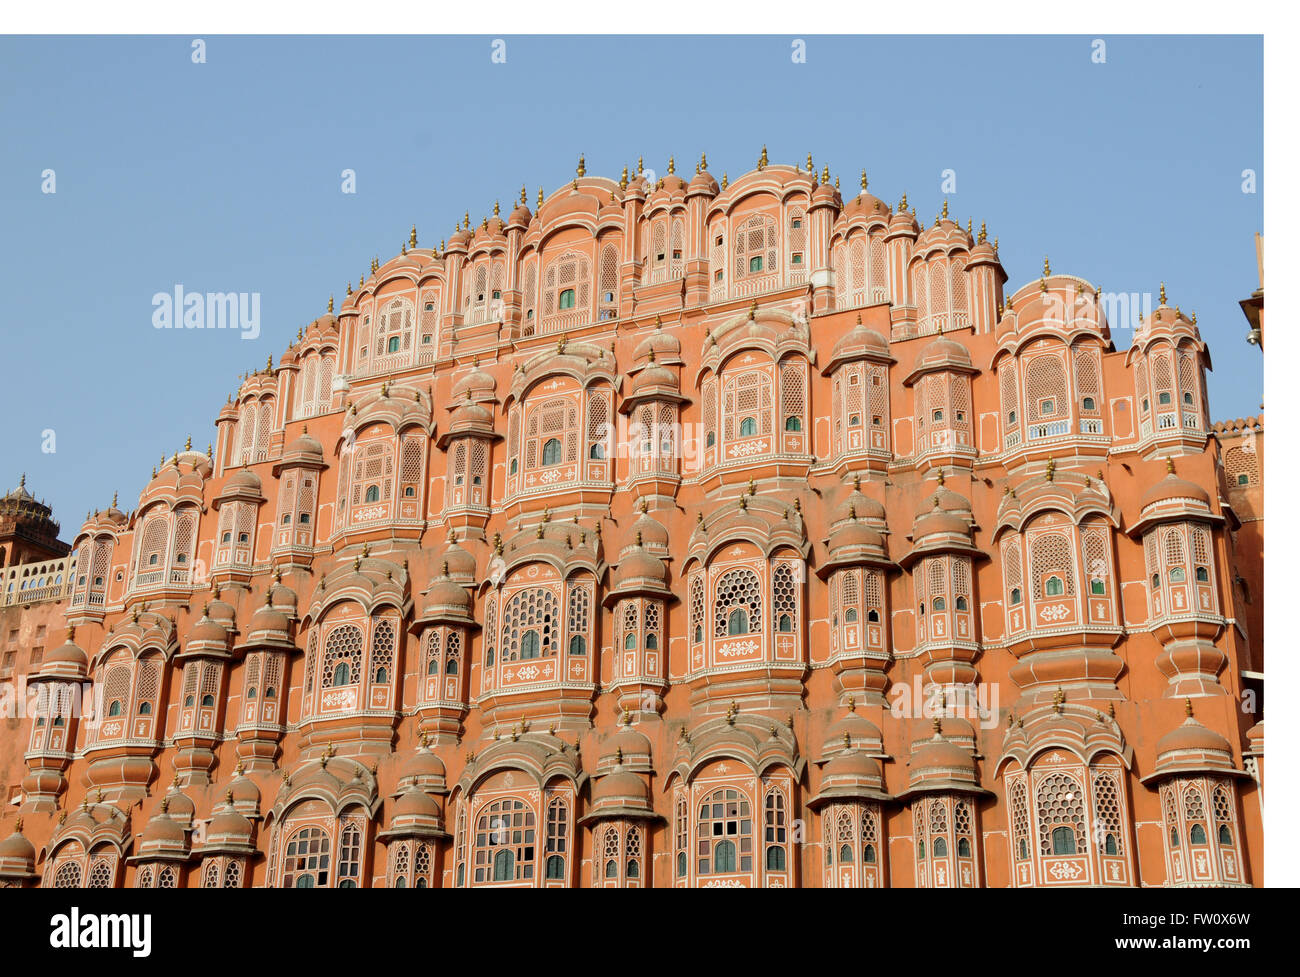 The facade of the Hawa Mahal, the Palace of the Winds, in Jaipur, the capital of the Rajasthan State in Northern India. Stock Photo